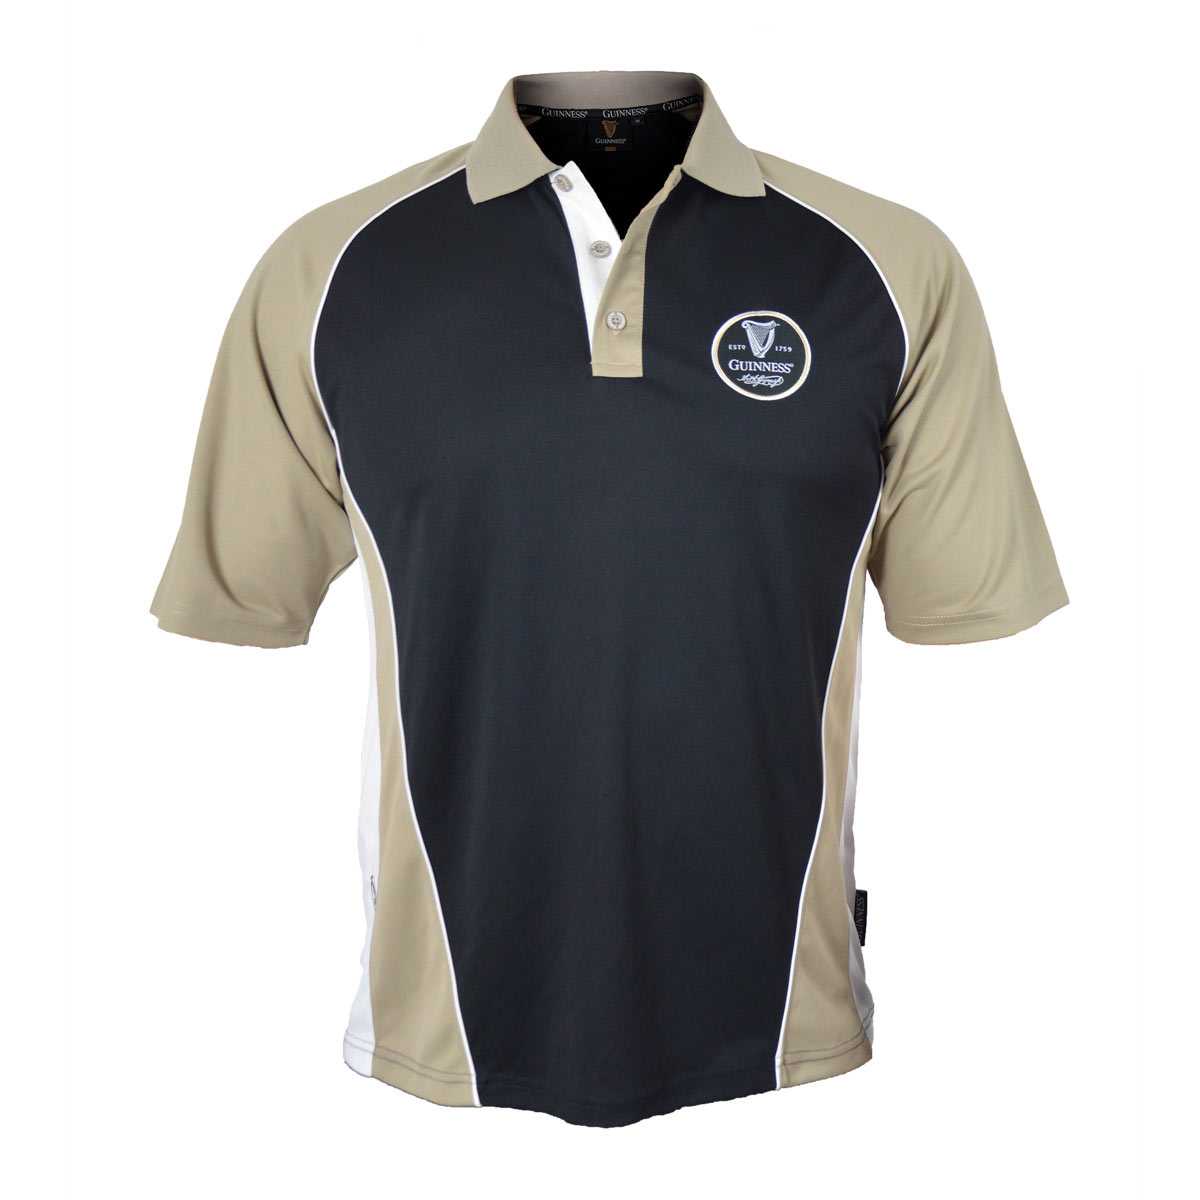 The Guinness UK men's black and tan golf polo shirt, made with moisture wicking fabric.